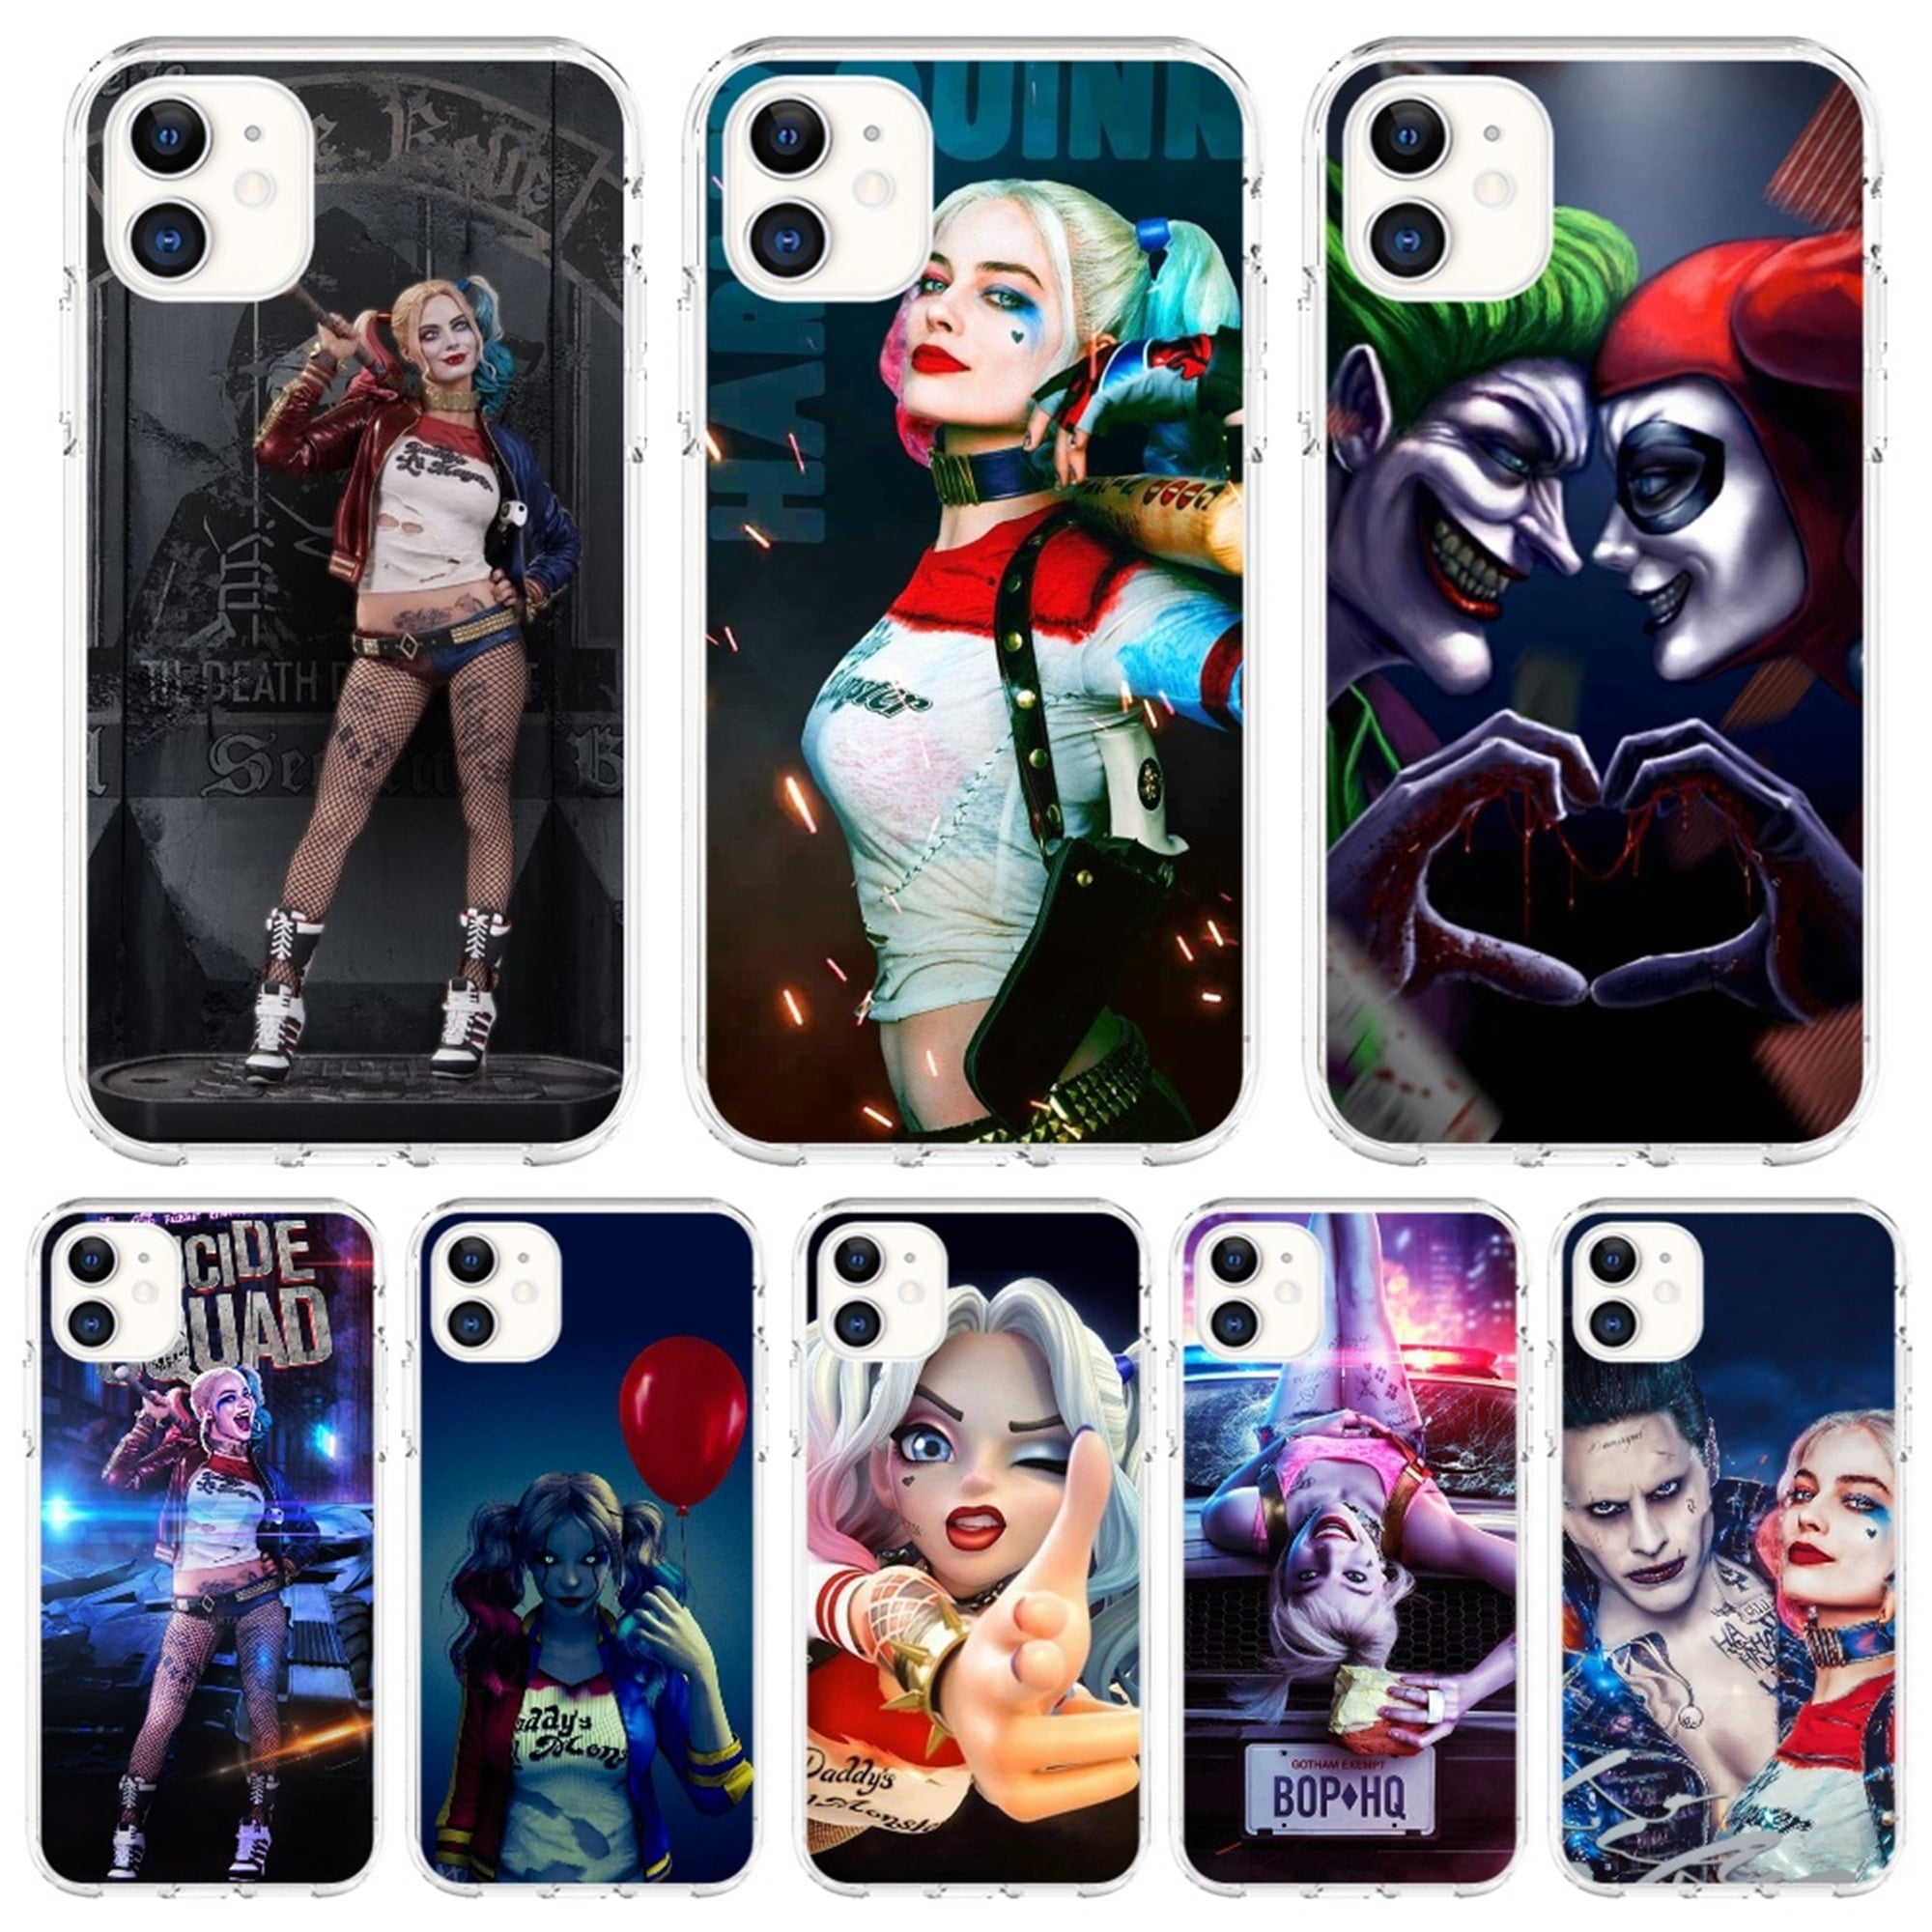 phone cover iphone xs cover suicide squad best phone cases android phone case xr case iphone xs max harley quinn funny phone cases